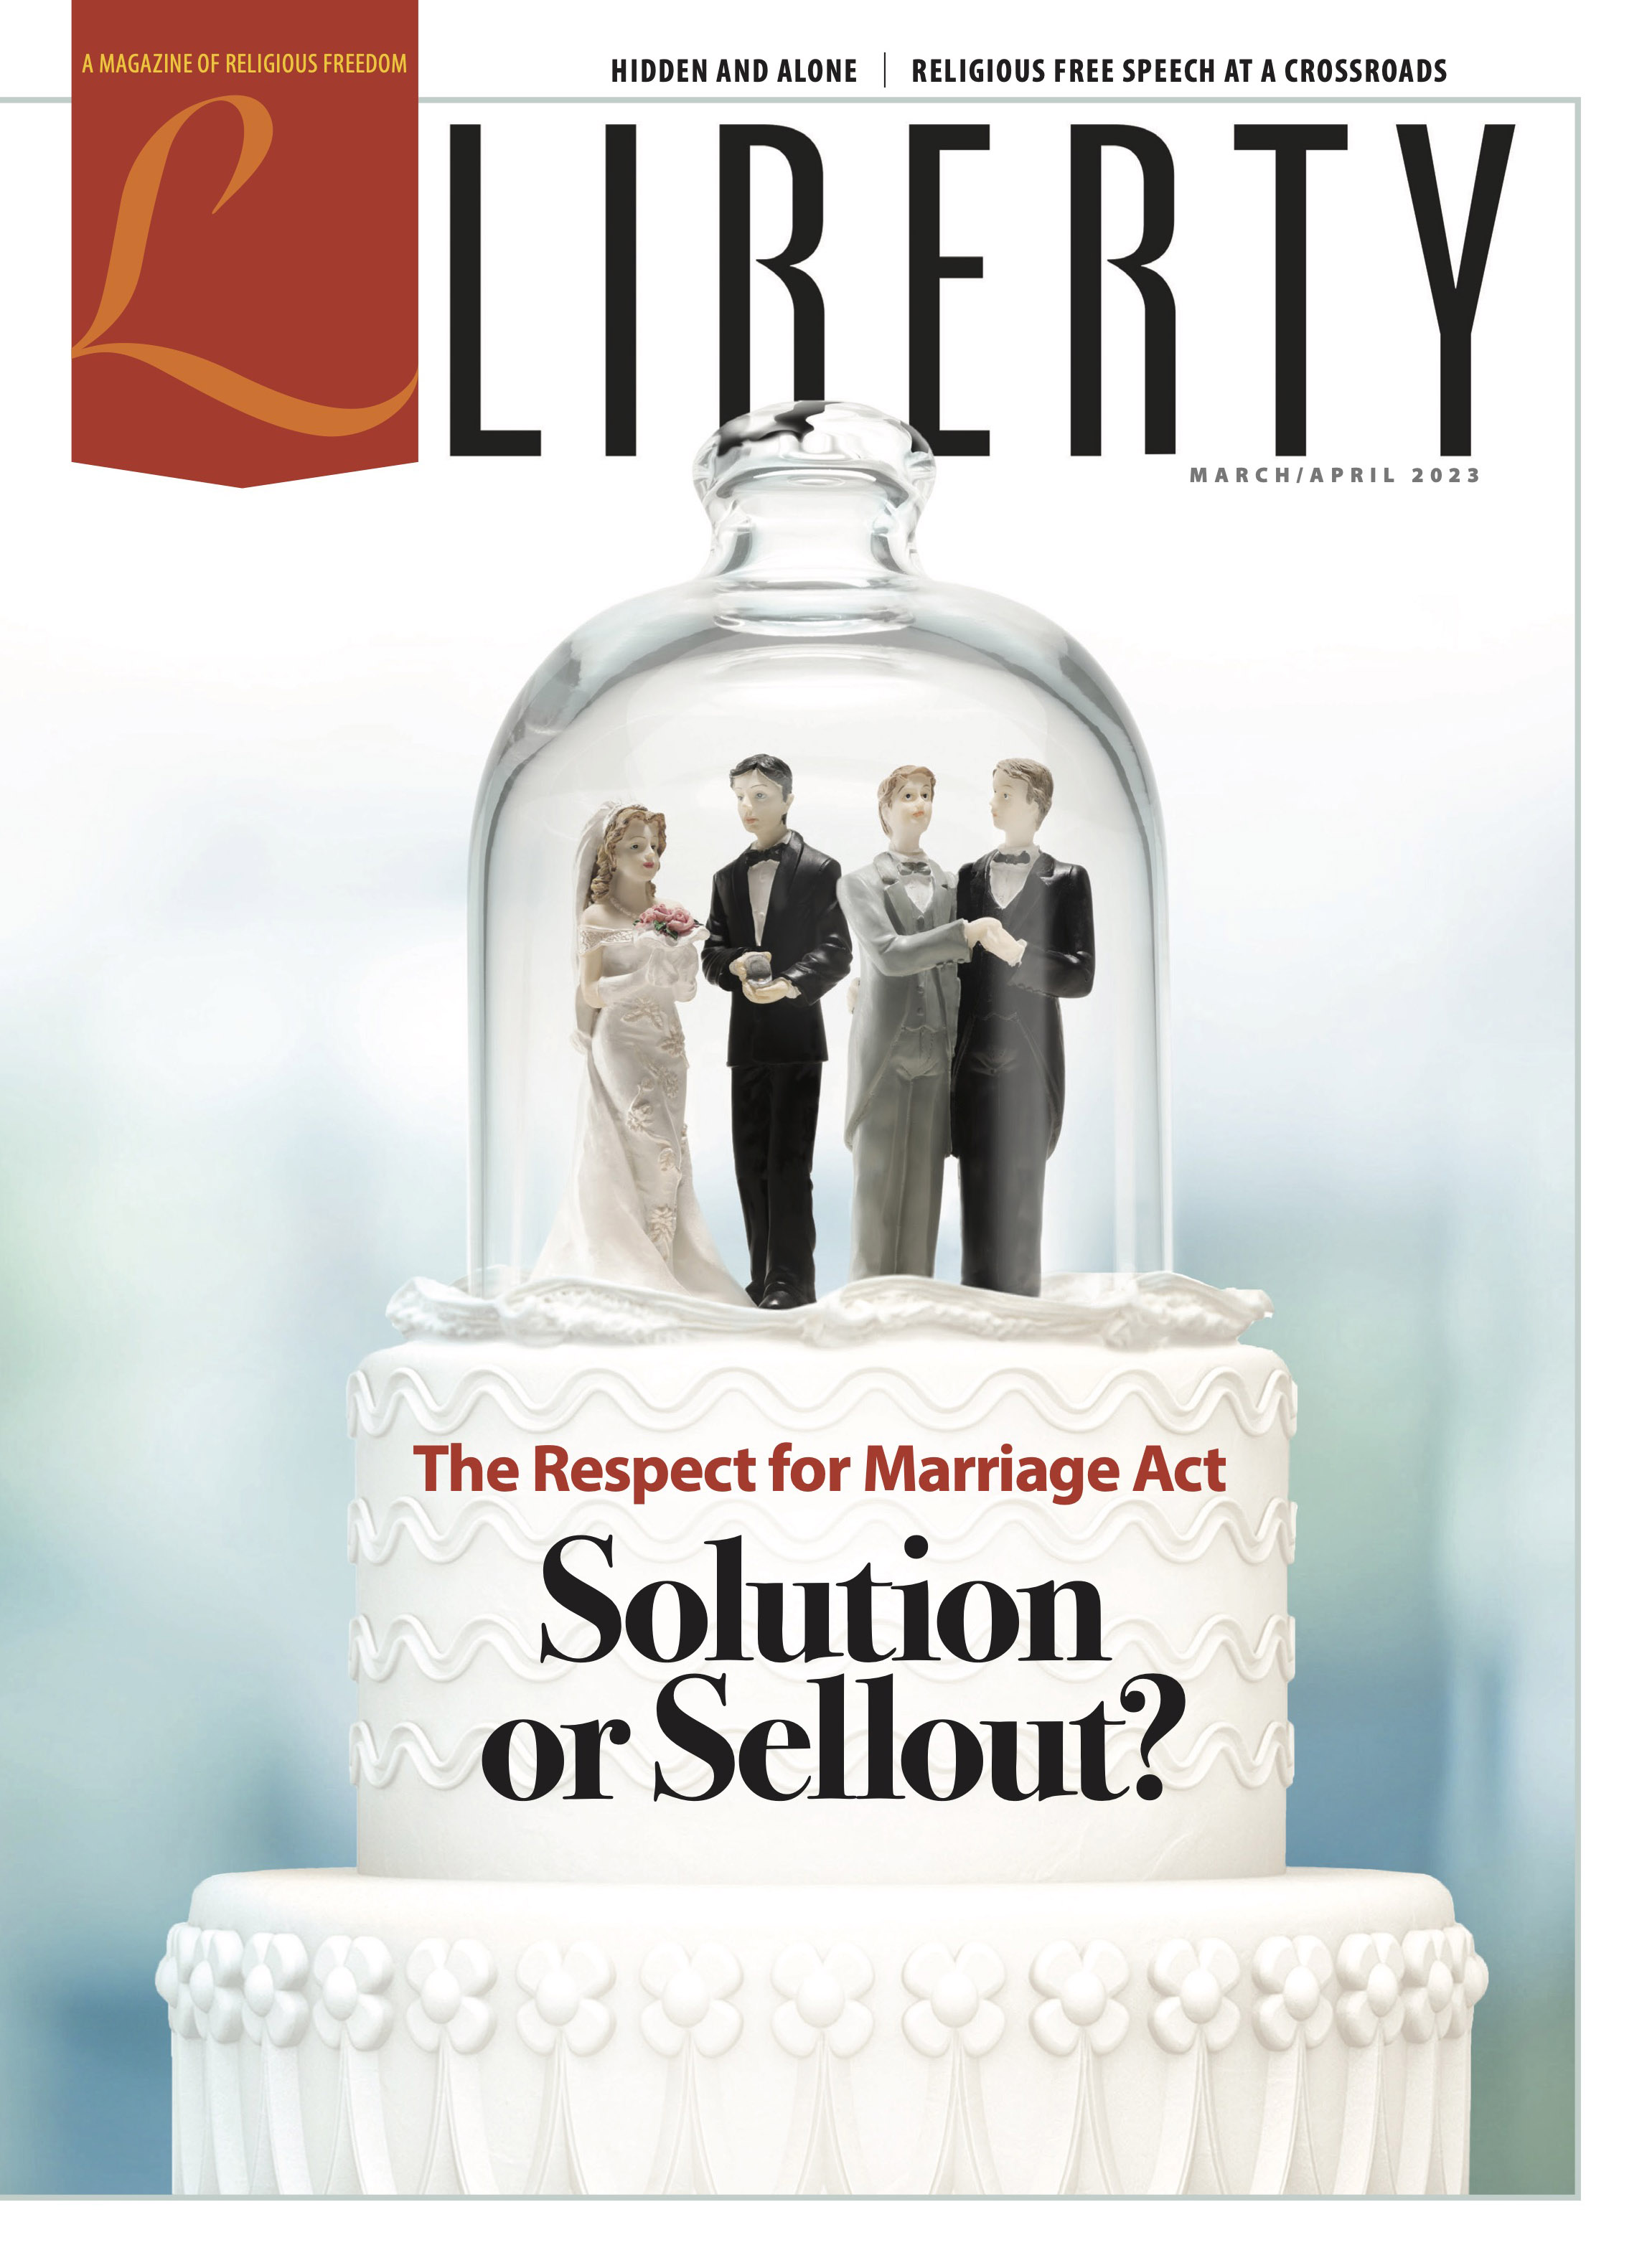 Liberty magazine cover from March/April 2023